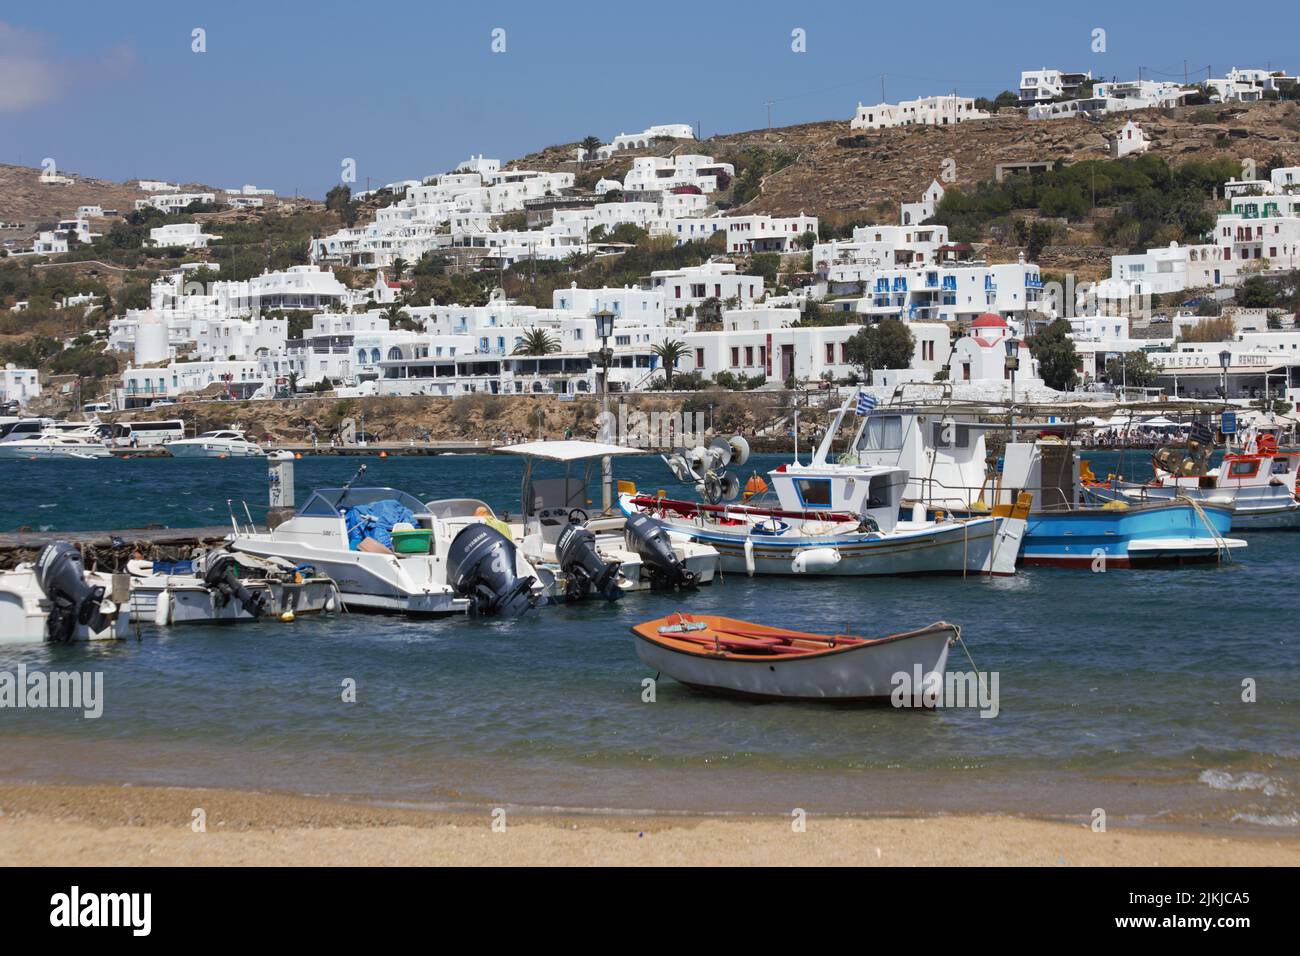 The Mykonos harbor in Greece with small boats in the foreground Stock Photo